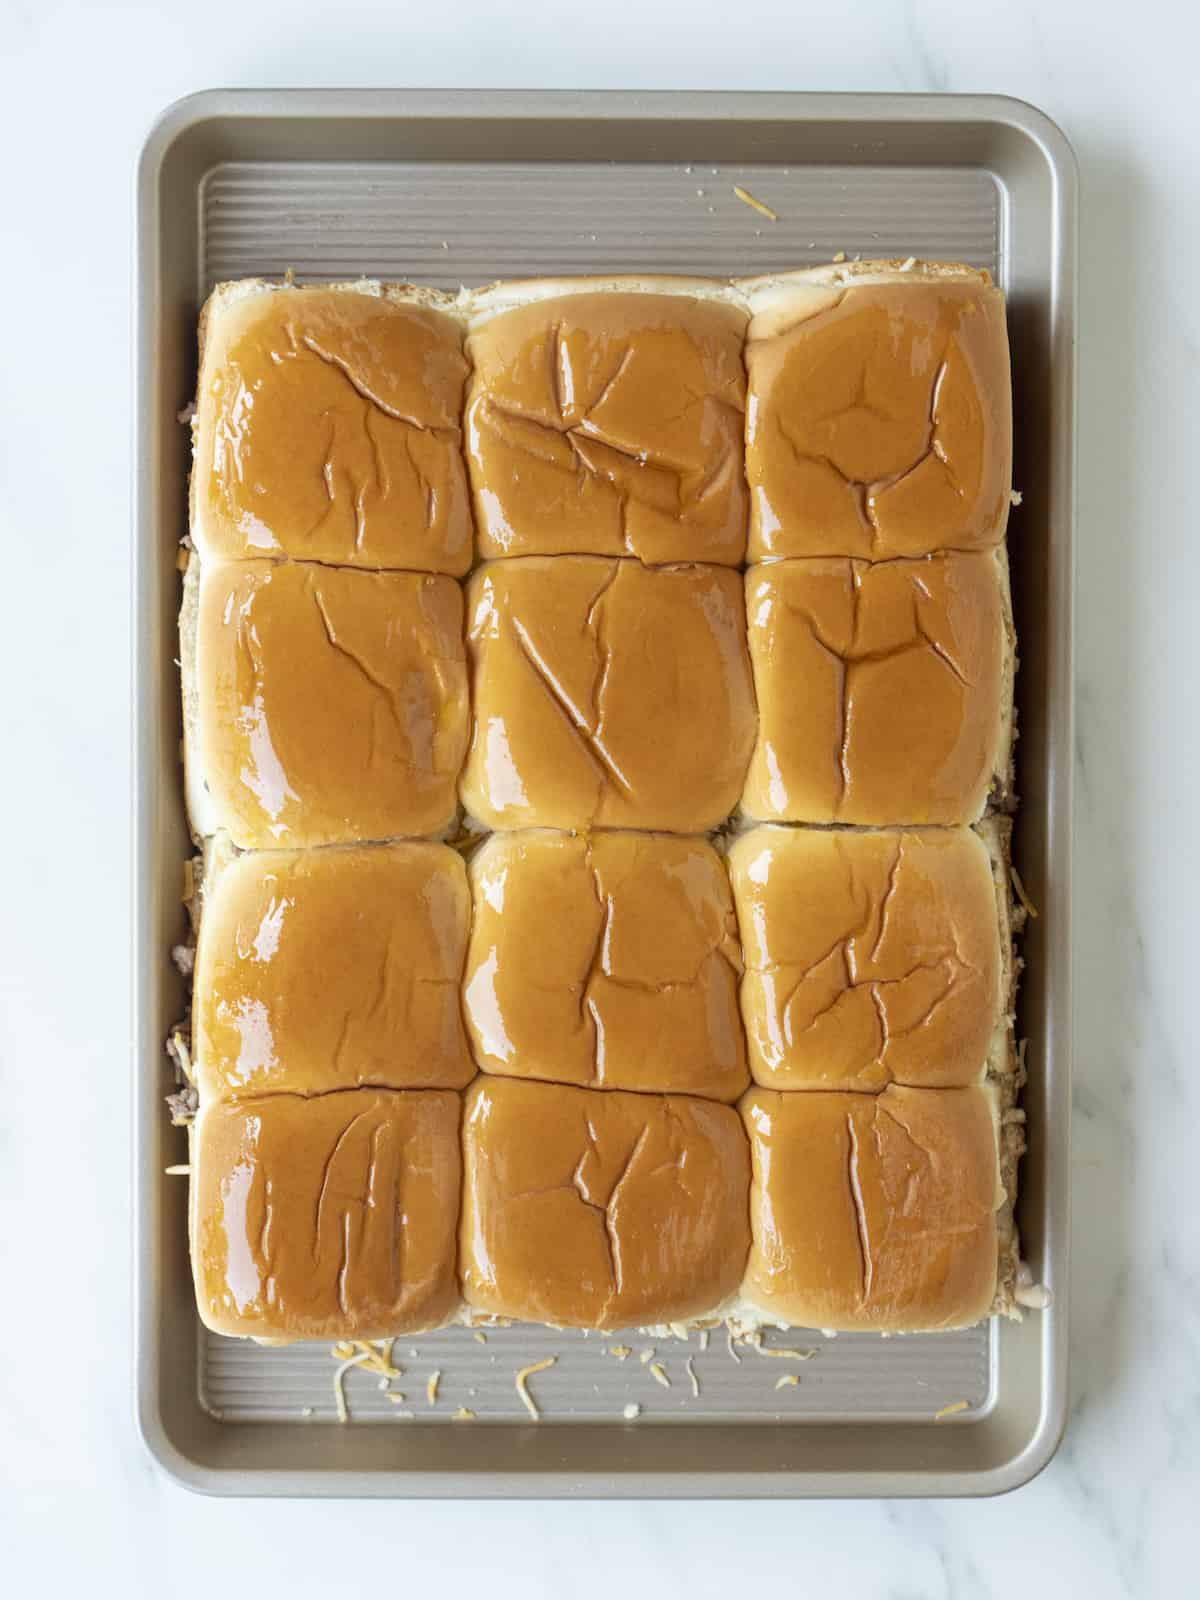 A baking sheet with a 3x4 grid of cheeseburger sliders assembled with all the layers inside.